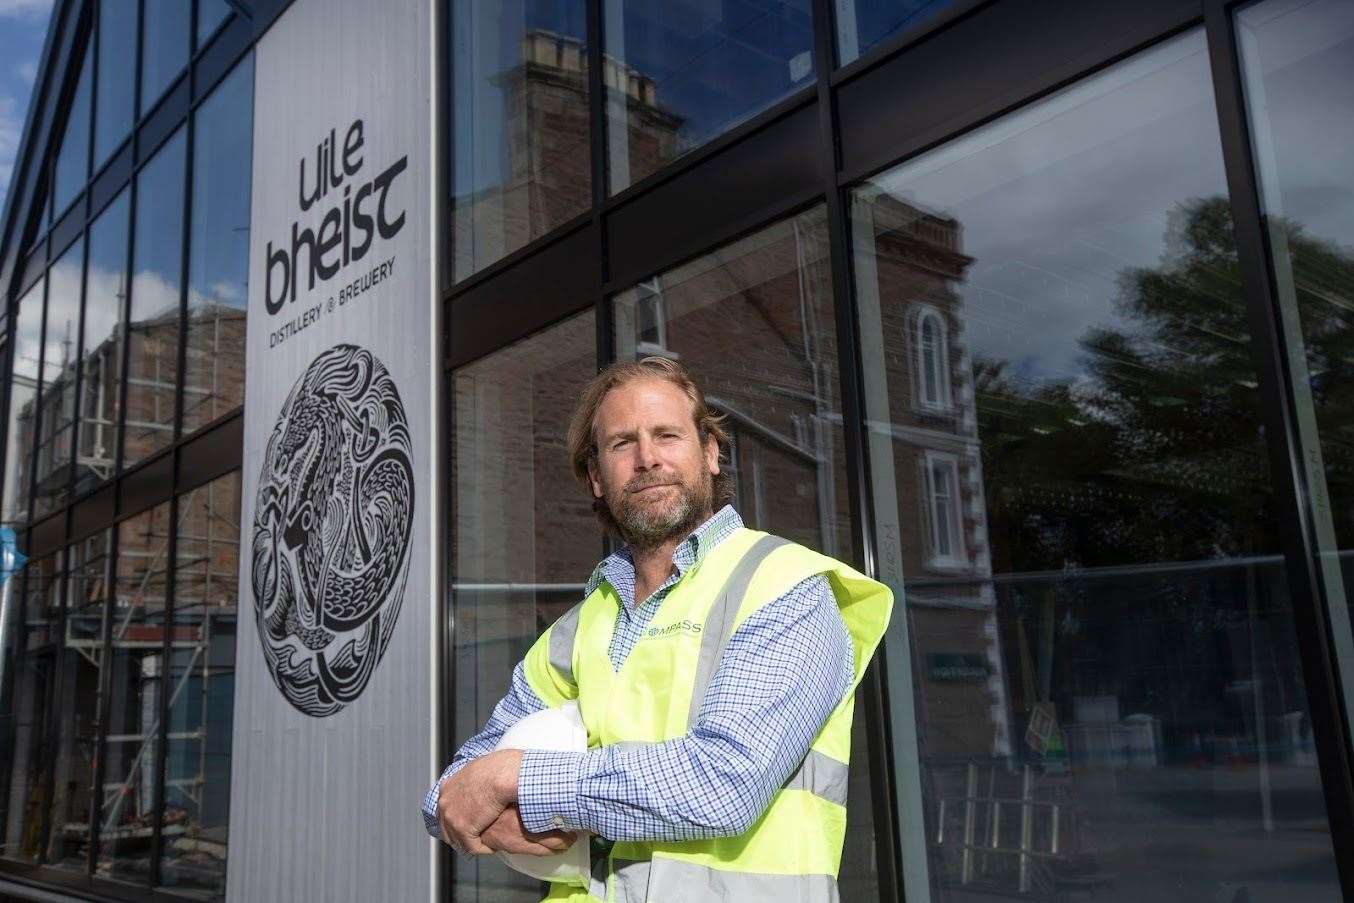 Uilebheist owner Jon Erasmus wanted create something unique to the Inverness area with the distillery, and brewery powered by the River Ness.